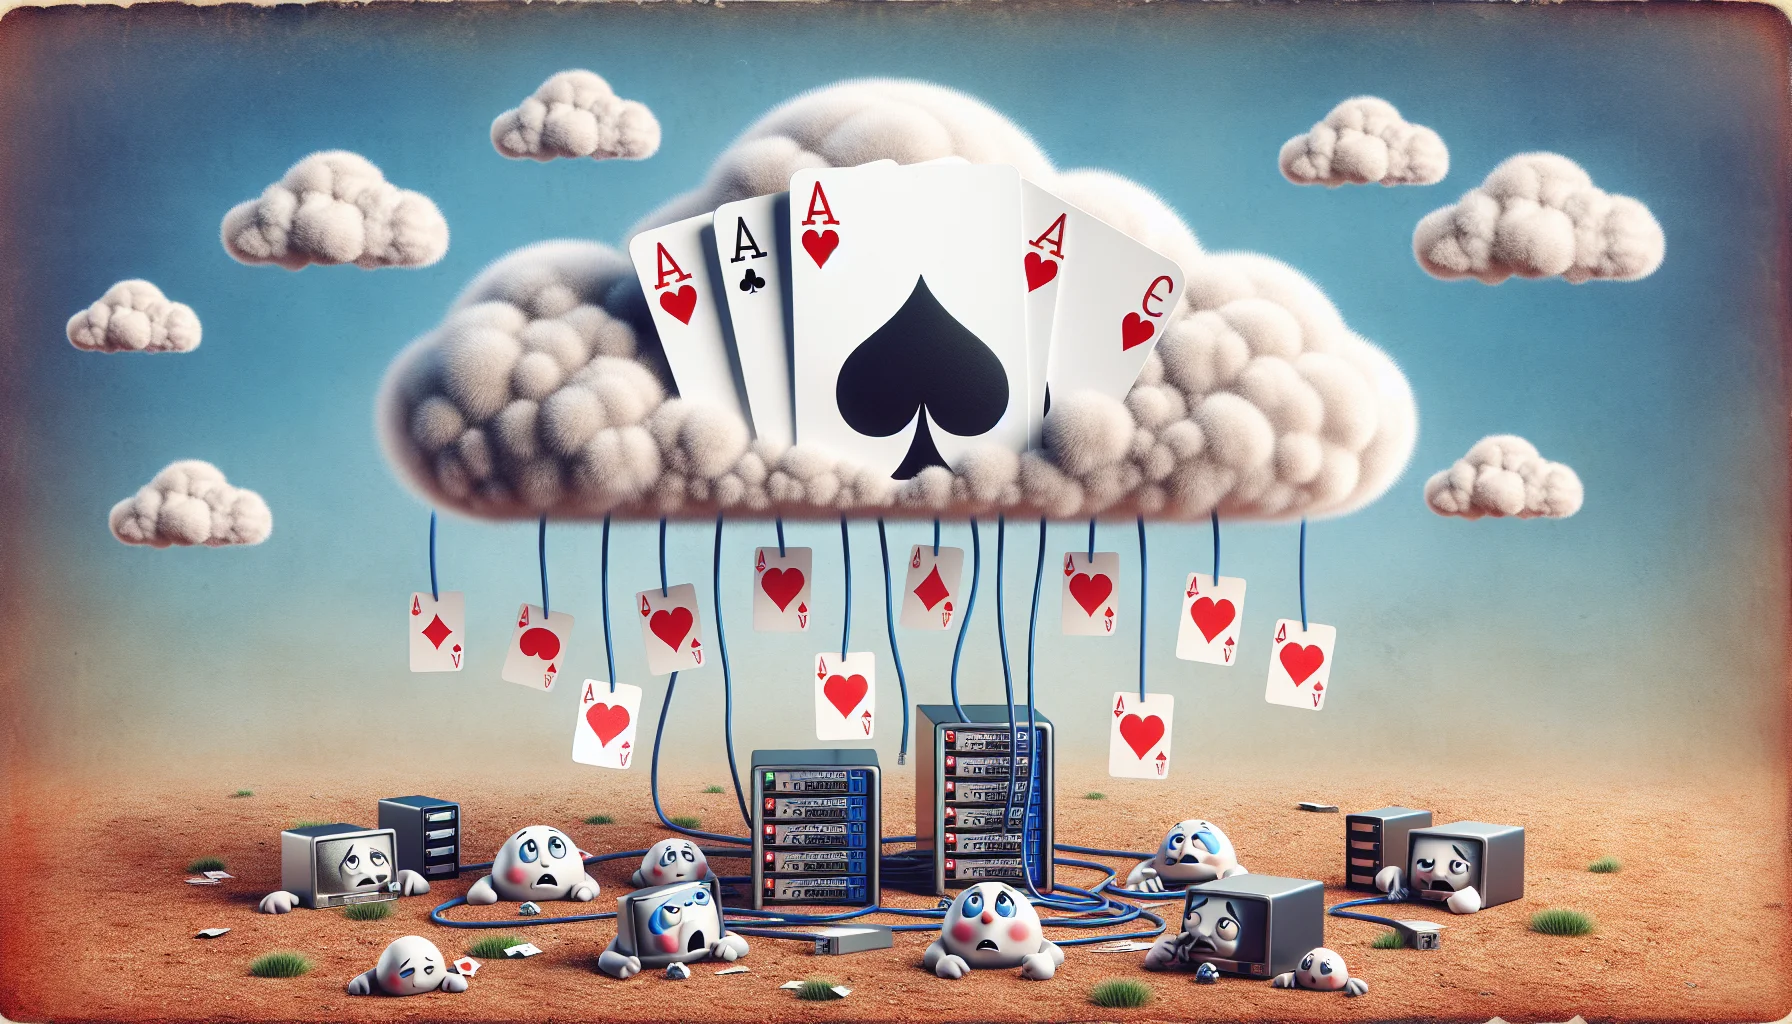 Create a humorous scene of a sky filled with playing card aces, depicted as fluffy white clouds. Below, a ground with various tiny servers and computers, all with cute, bewildered faces, are reaching up their cables trying to connect with the ace clouds. The scene should portray a metaphorical representation of cloud web hosting, with a playful and enticing aura surrounding it.